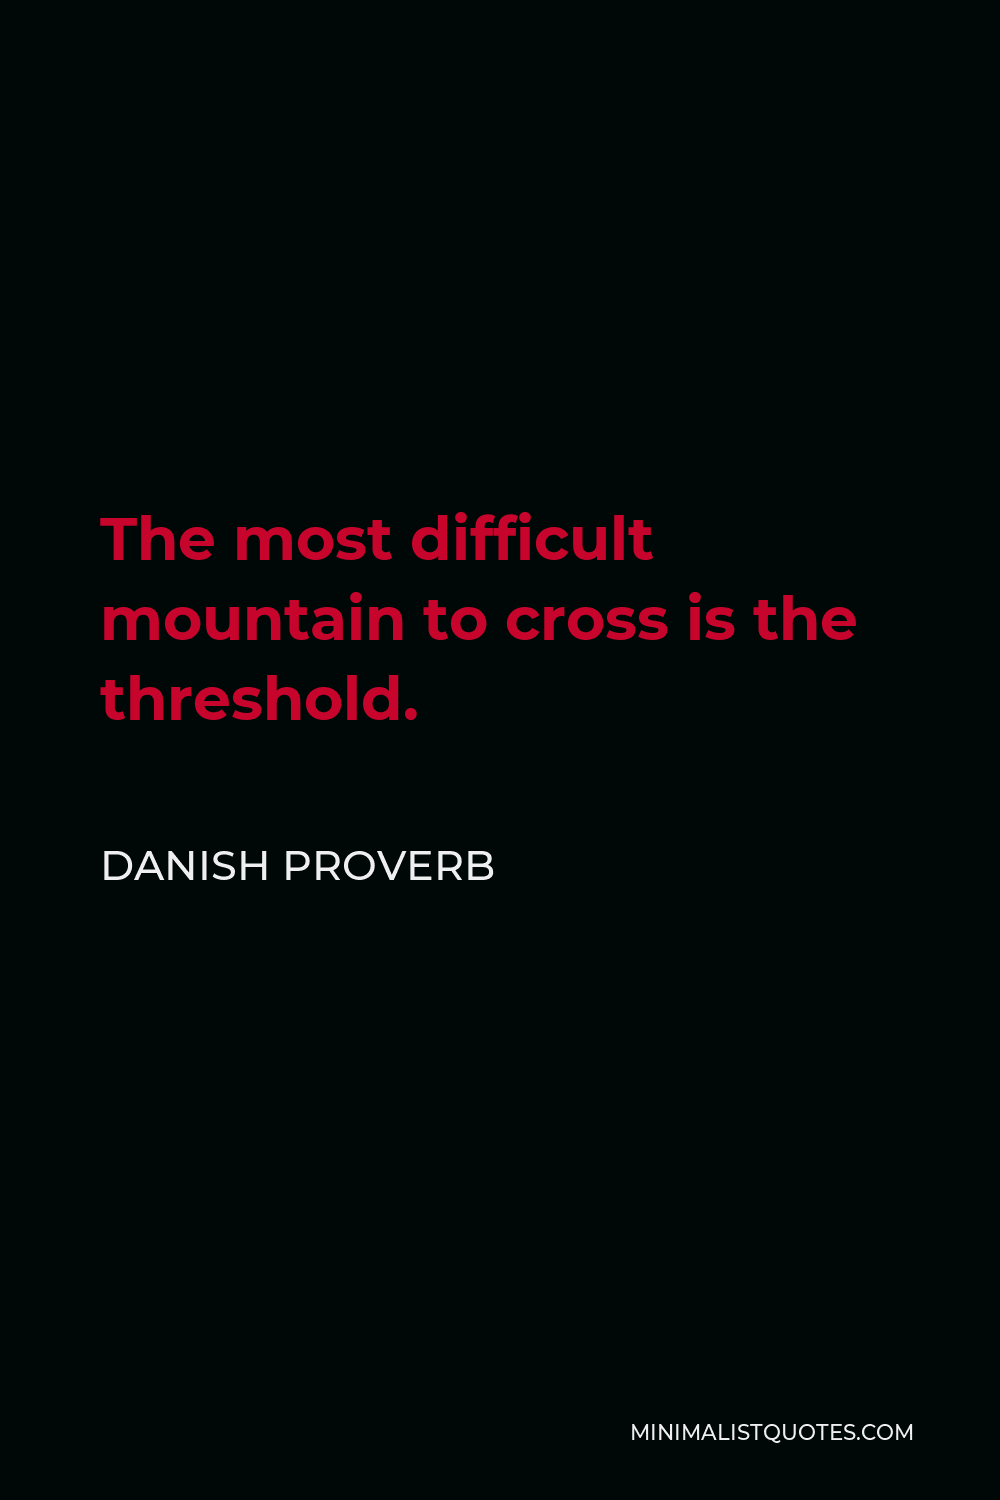 Danish Proverb Quote - The most difficult mountain to cross is the threshold.